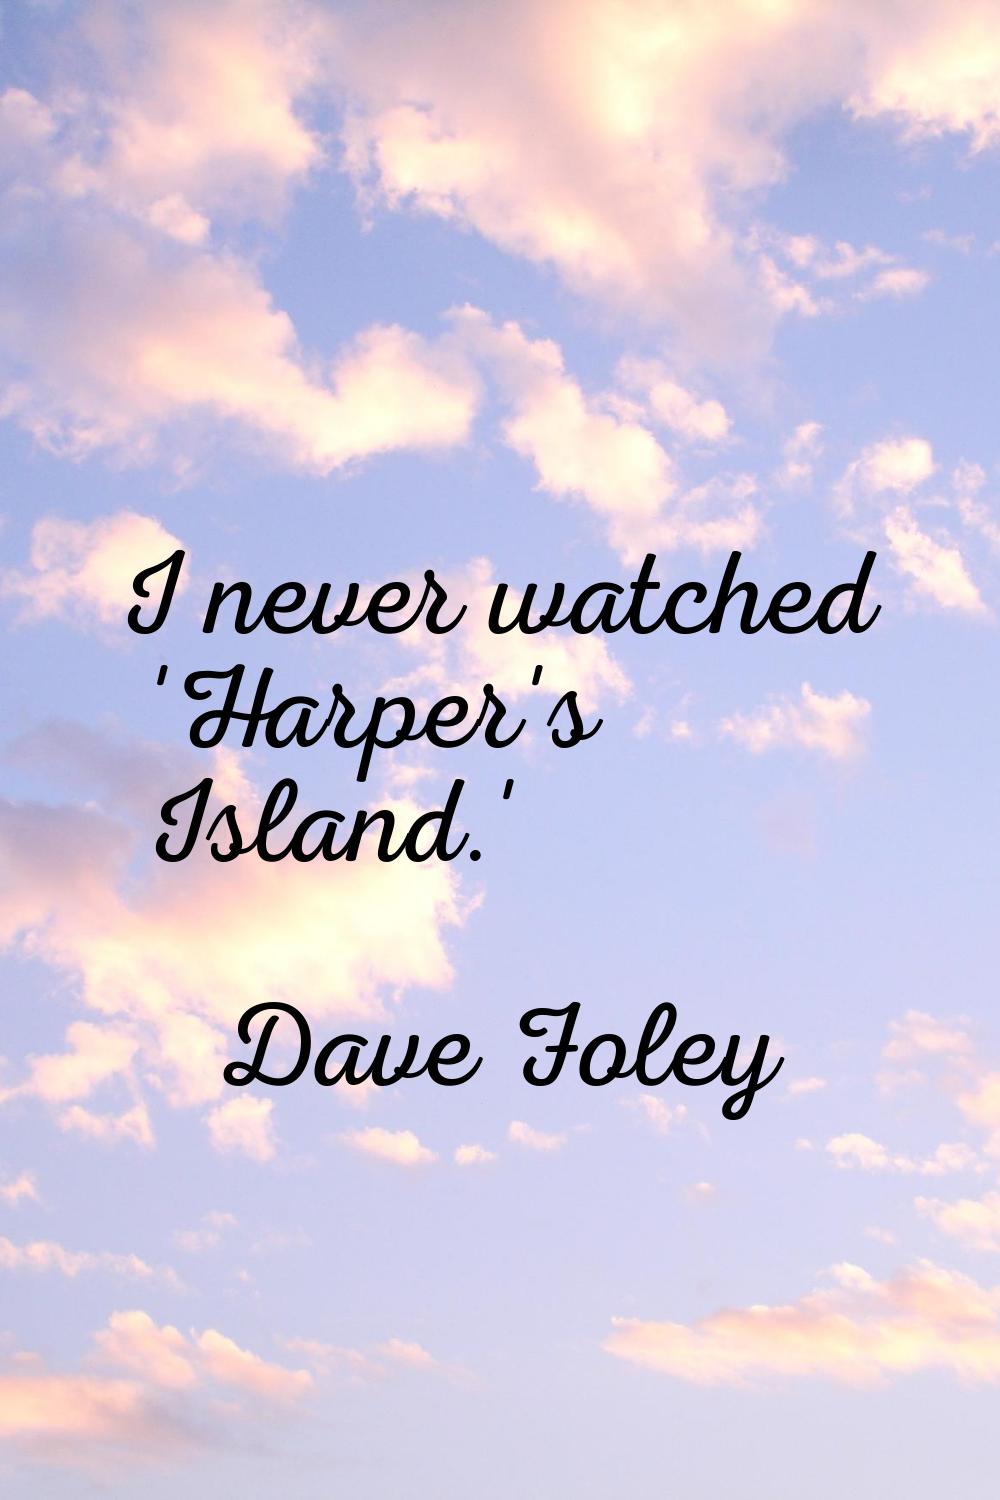 I never watched 'Harper's Island.'